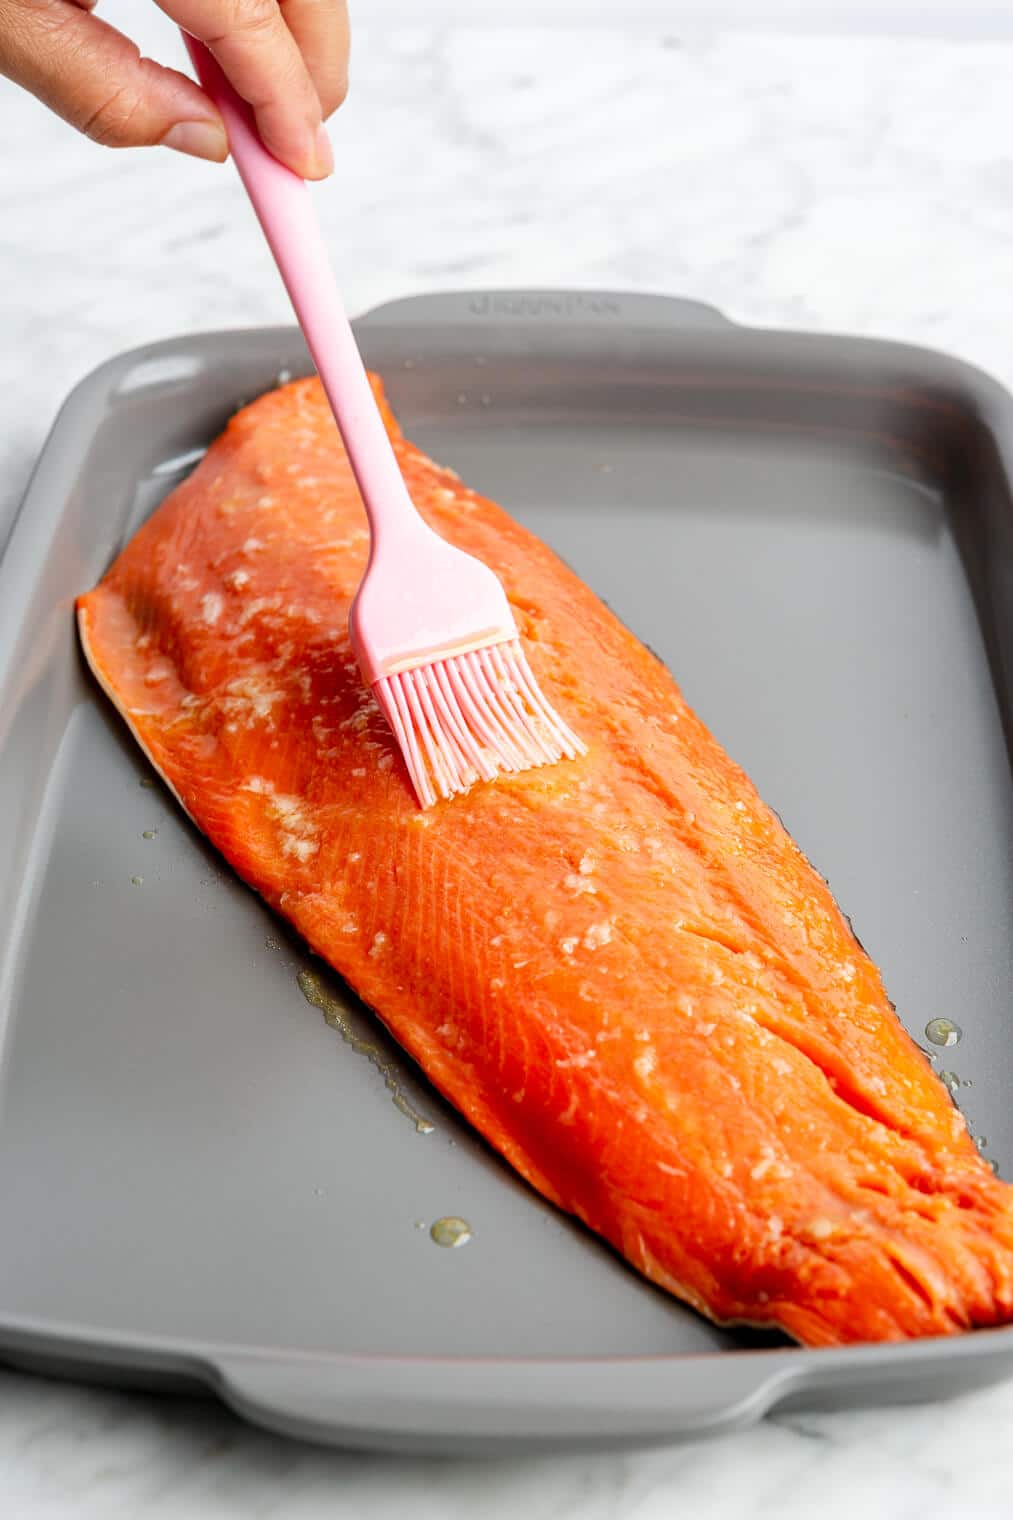 Hand brushing olive oil mixture onto a filet of salmon with a pink silicone brush. The salmon filet is sitting on a grey sheet pan.